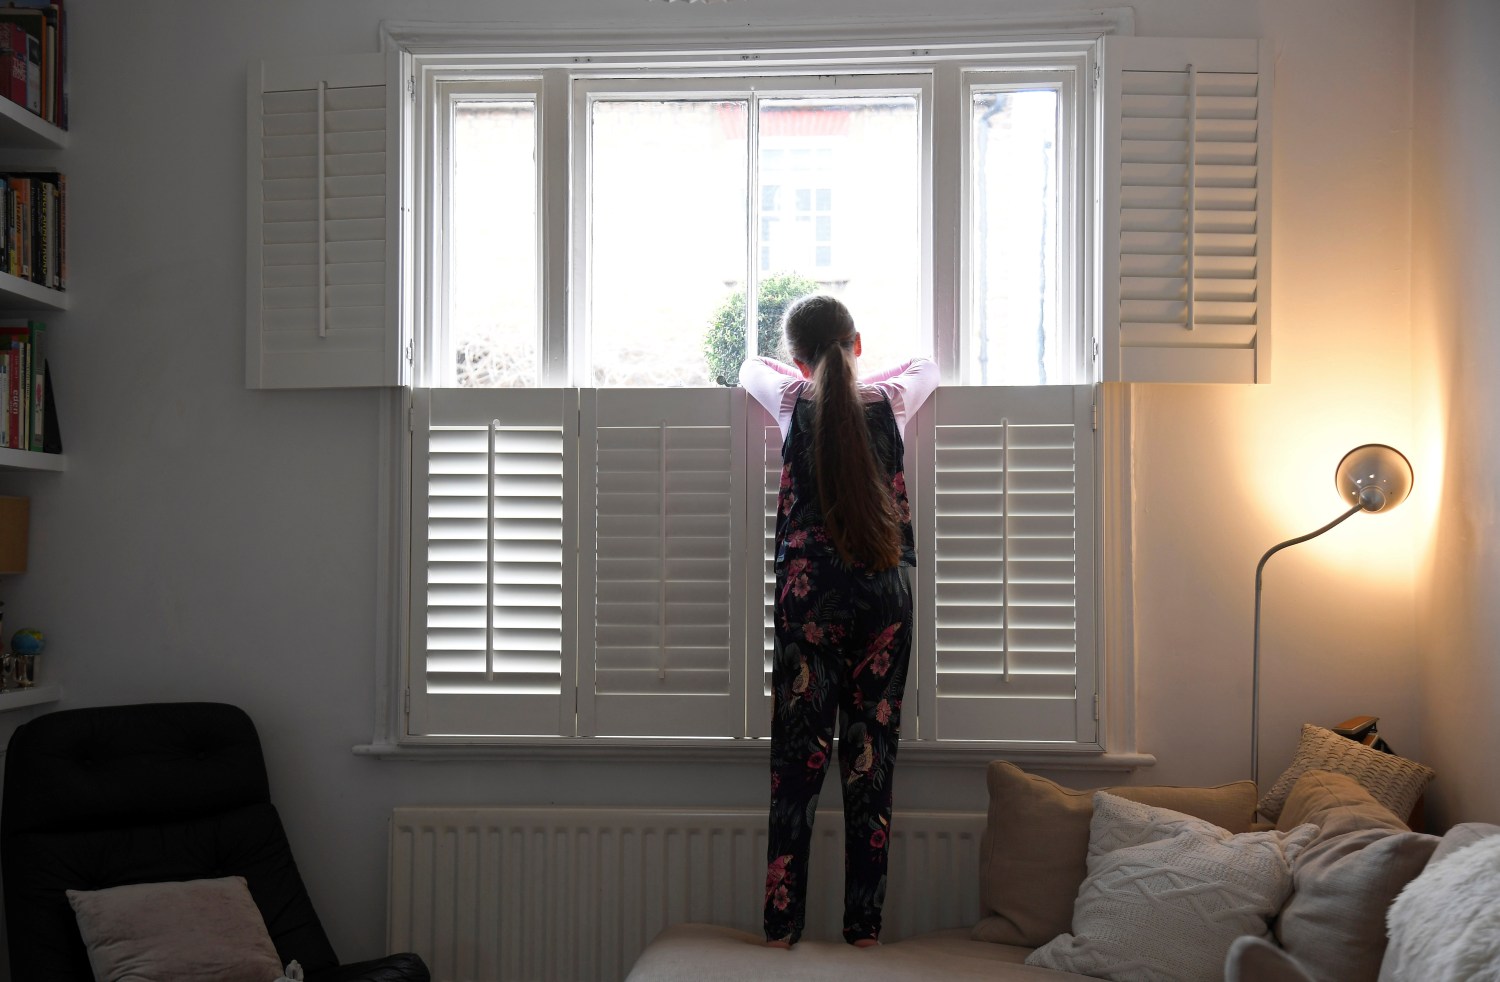 Nine-year-old Eve looks out of the front window at home, as the number of coronavirus disease (COVID-19) cases grow around the world, in London, Britain, March 17, 2020. REUTERS/Toby Melville